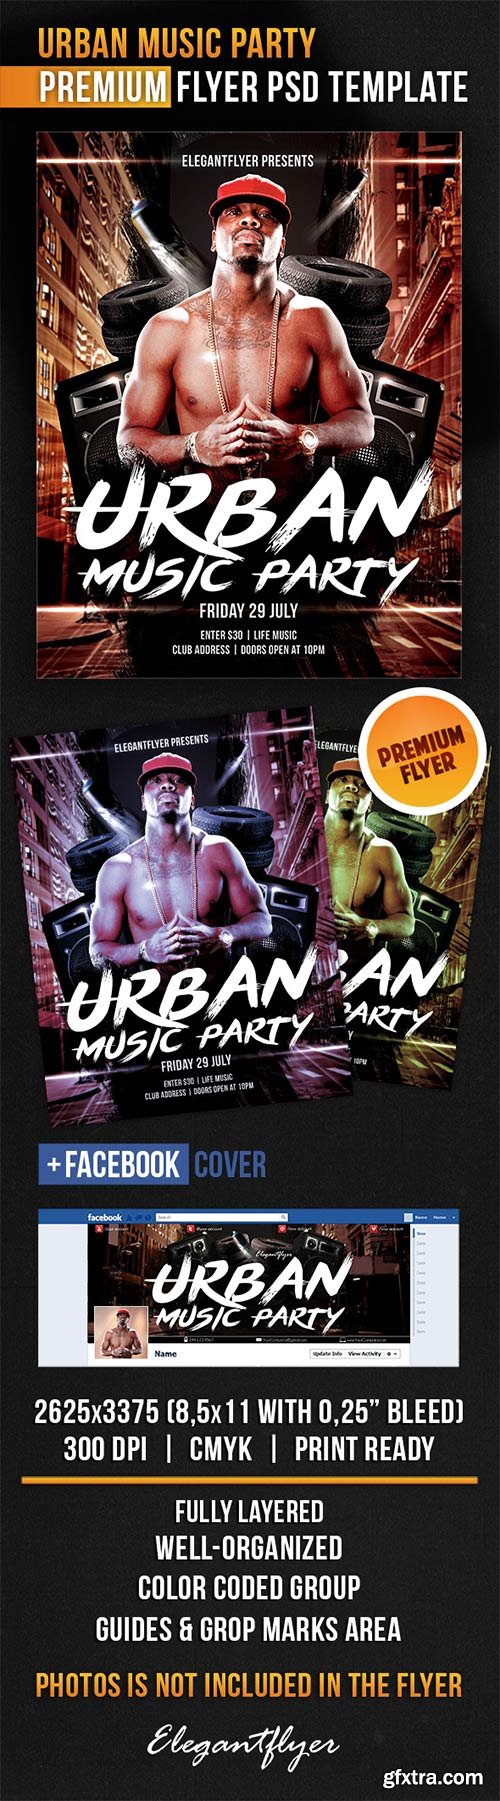 Urban Music Party Flyer PSD Template + Facebook Cover